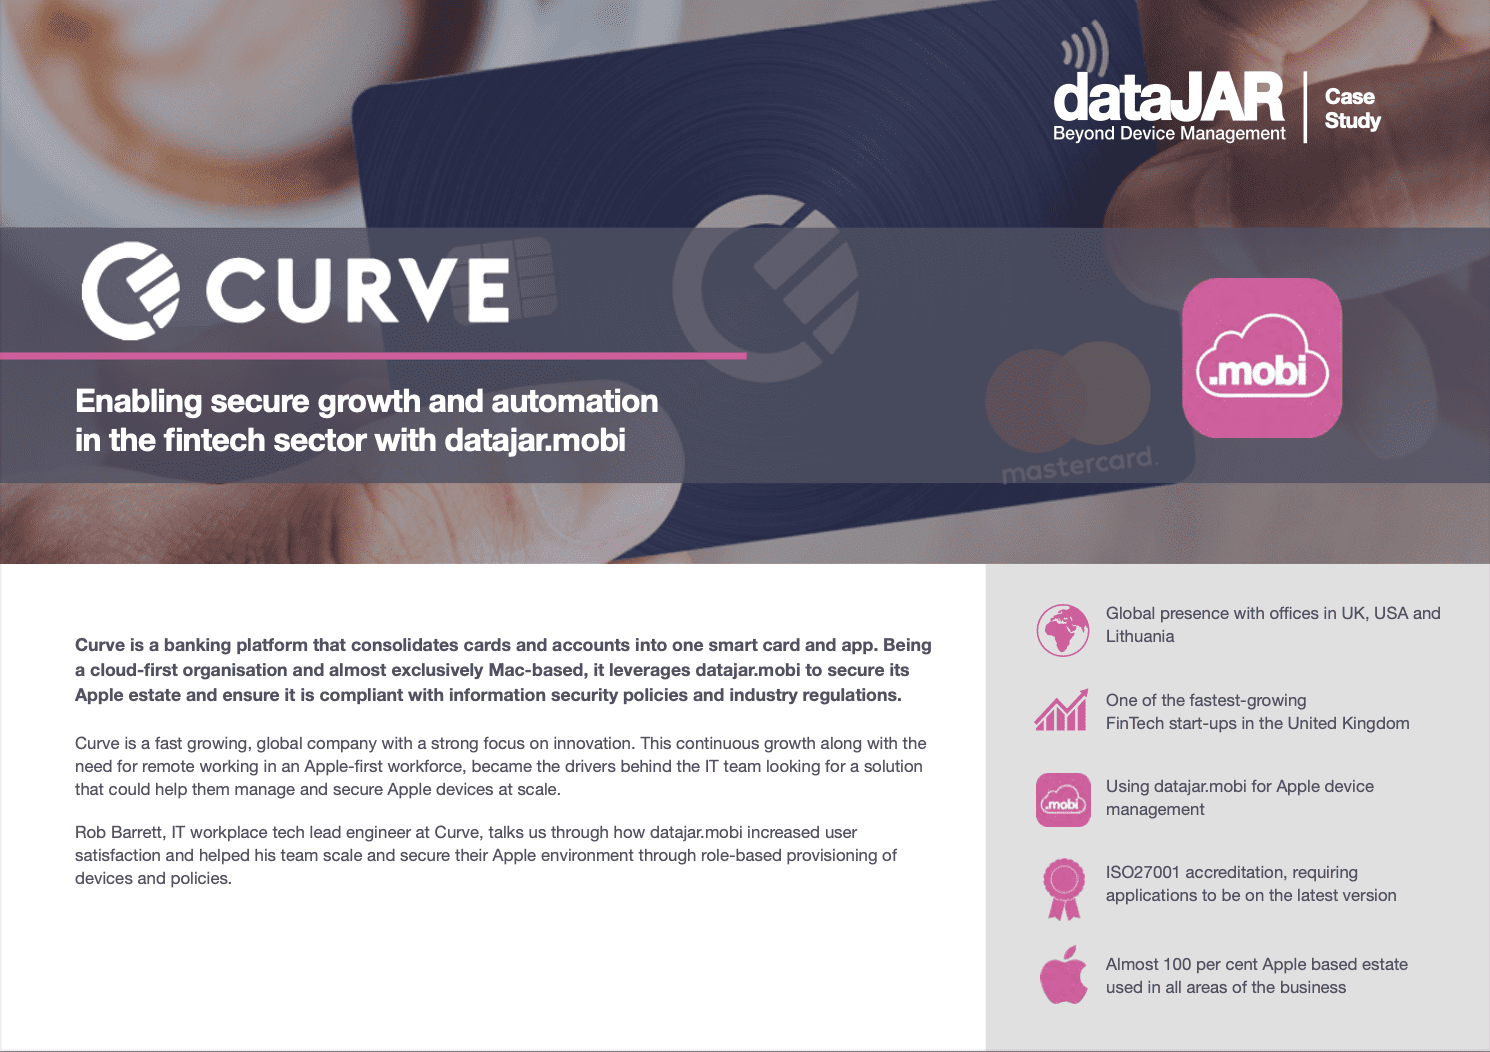 Curve - Enabling secure growth and automation in the fintech sector with datajar.mobi